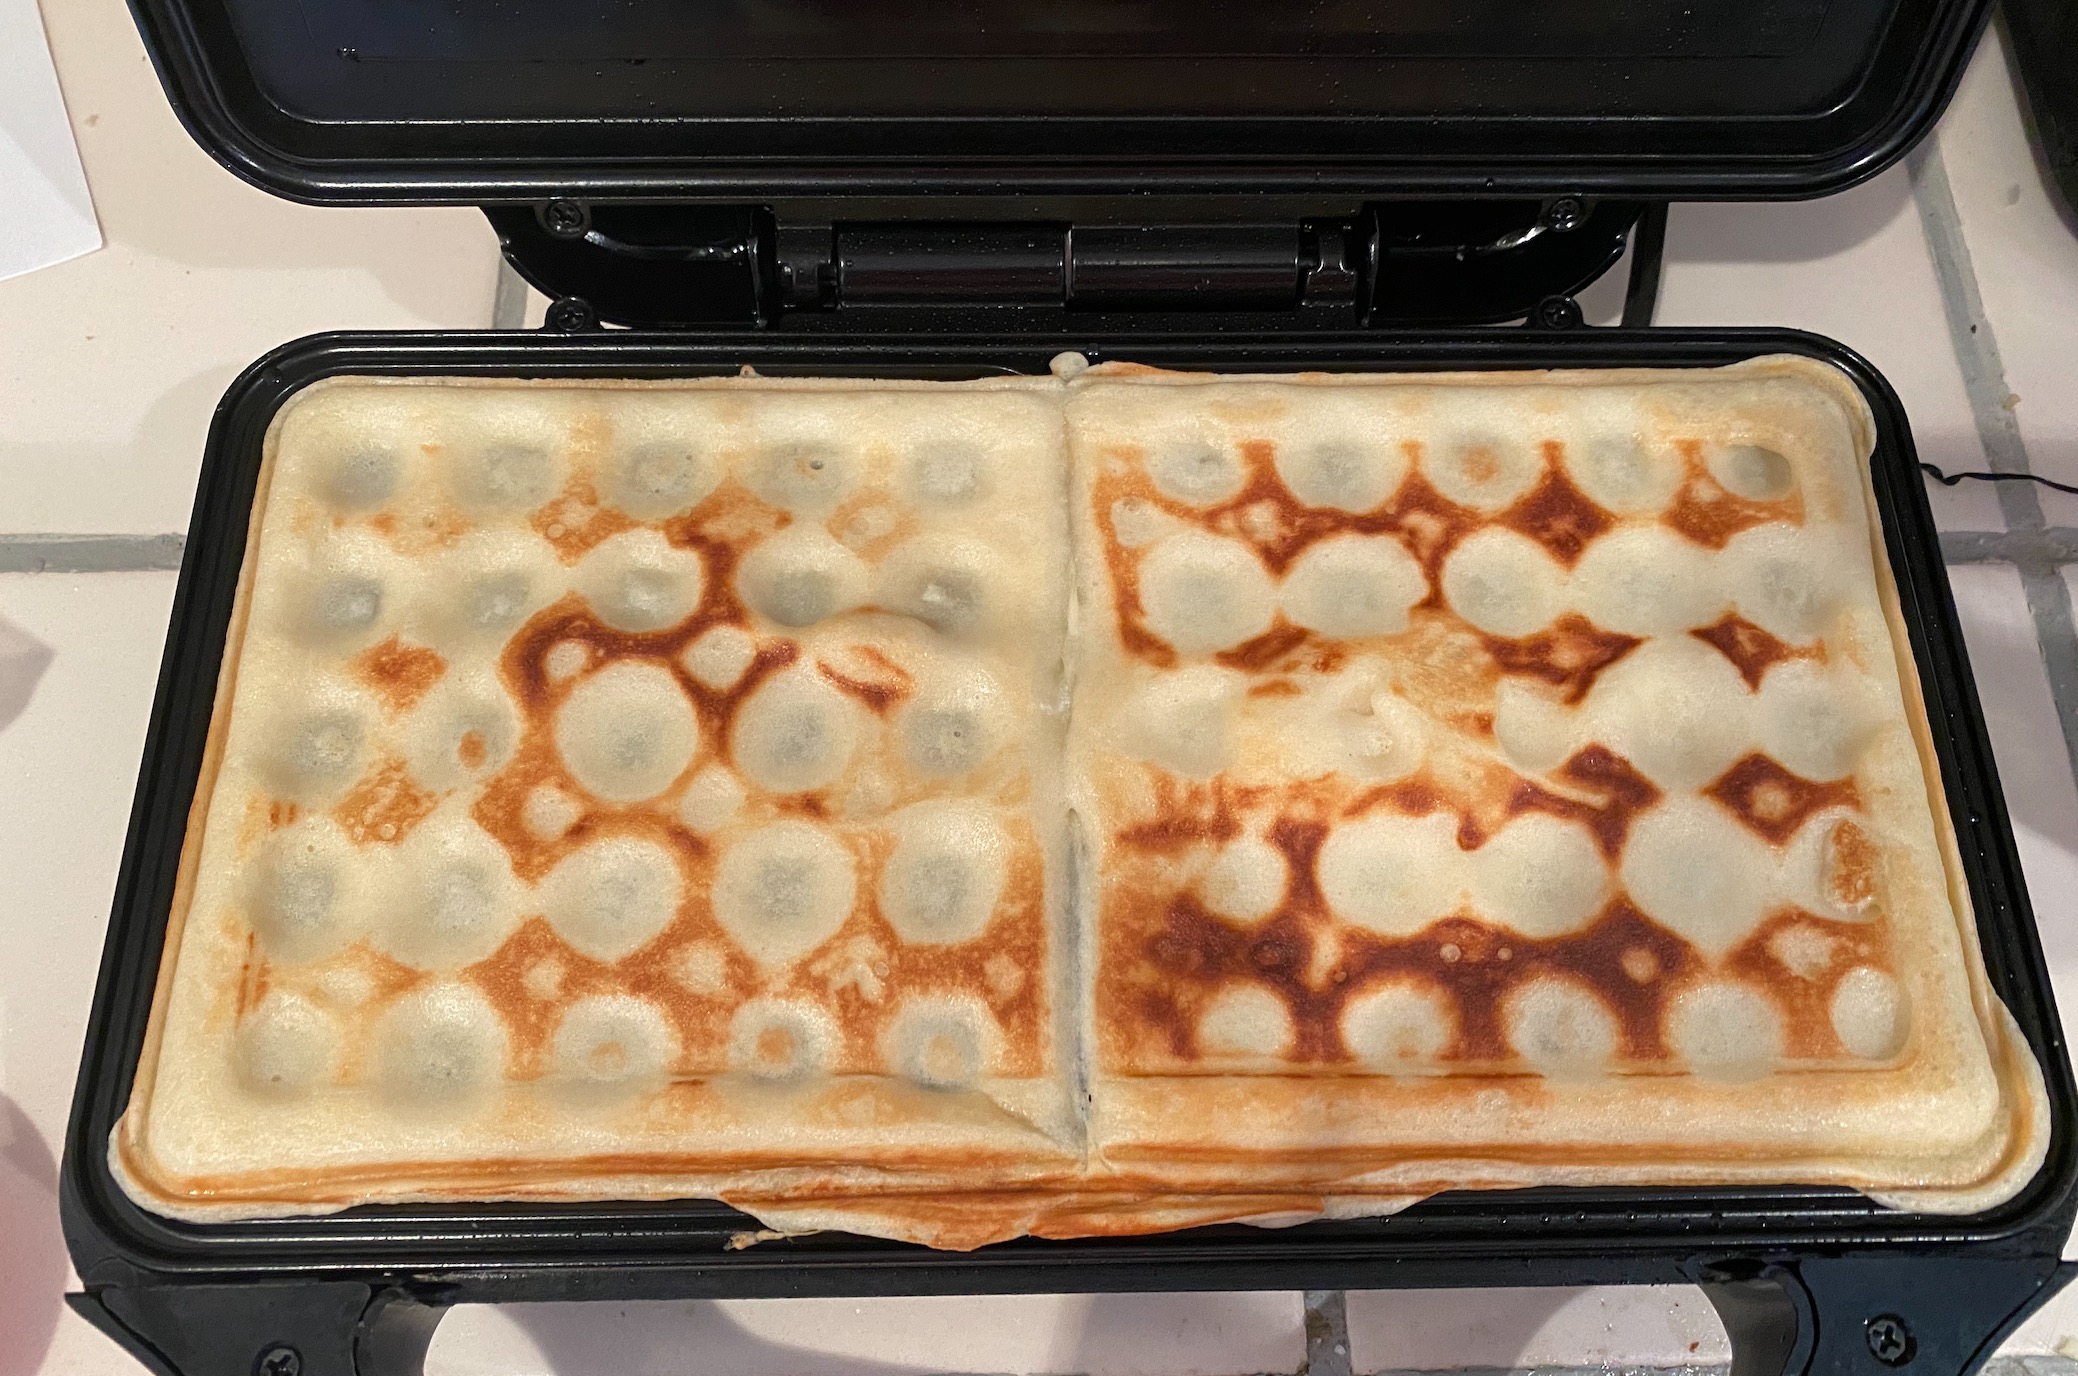 When you have enough batter to cover the top, but not enough for the full effect. (Photo: Gizmodo)